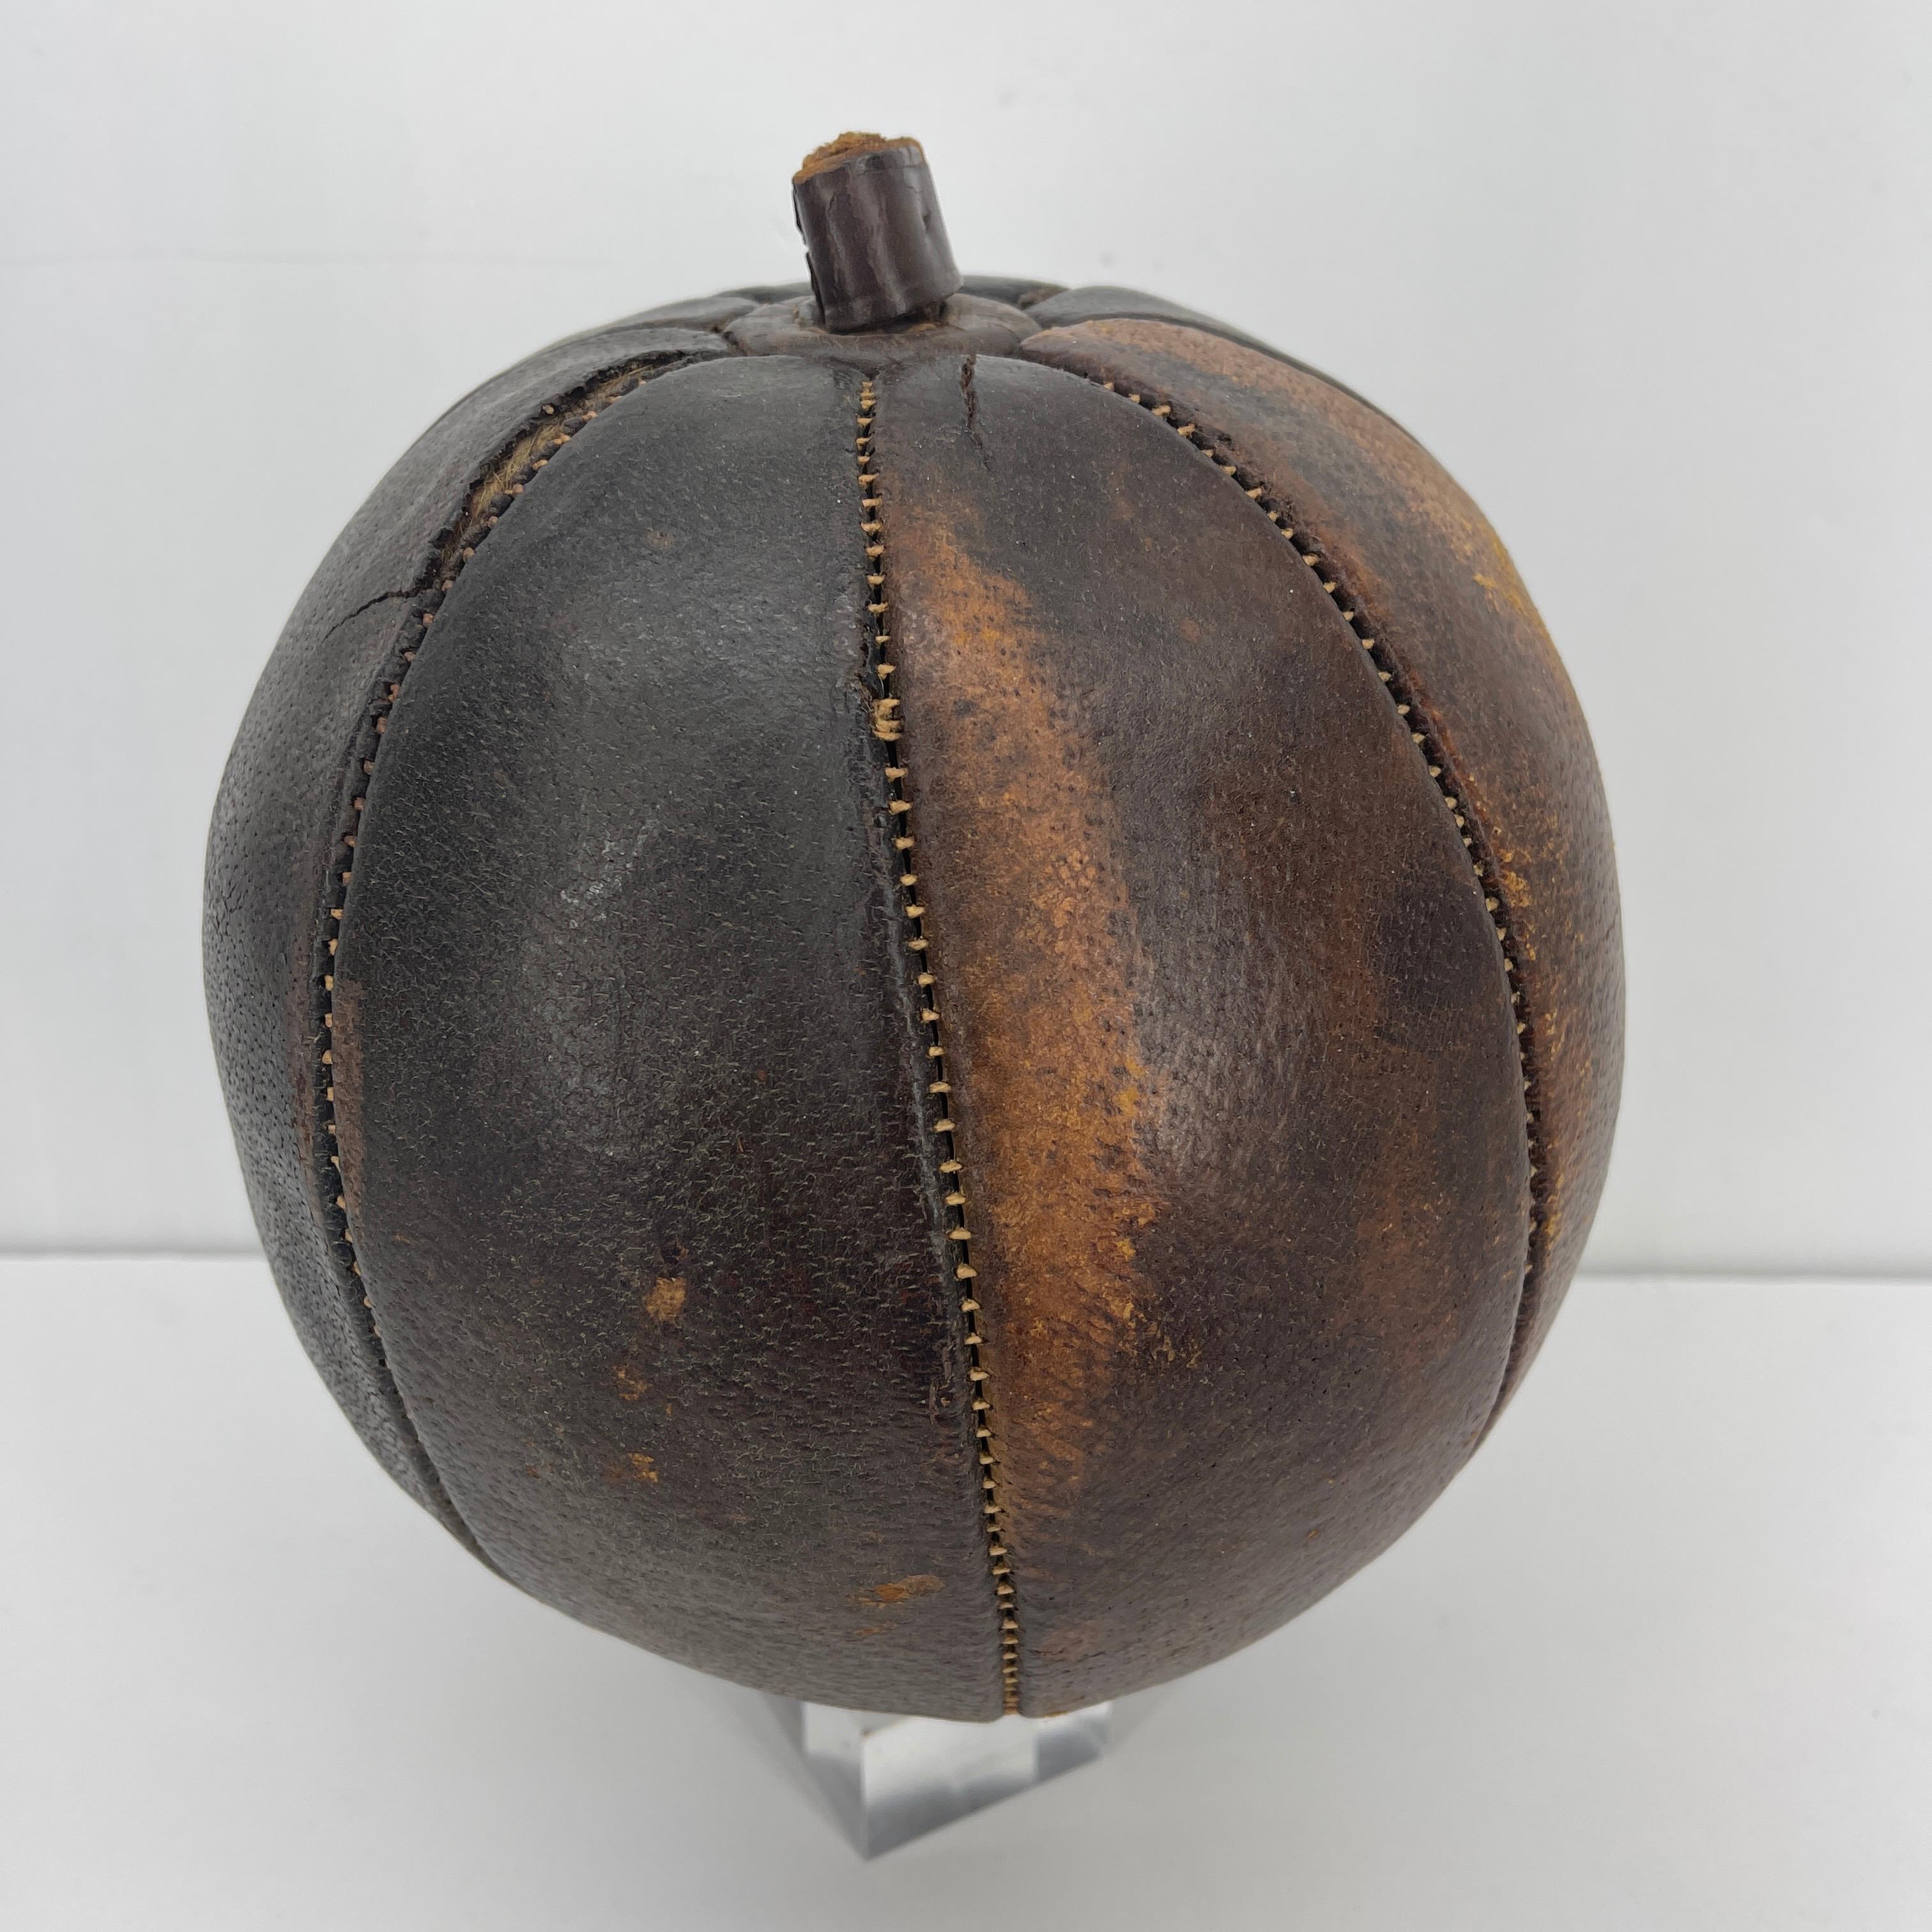 Spanish Abercrombie & Fitch Hand-Stitched Leather Pumpkin by Omersa & Company For Sale